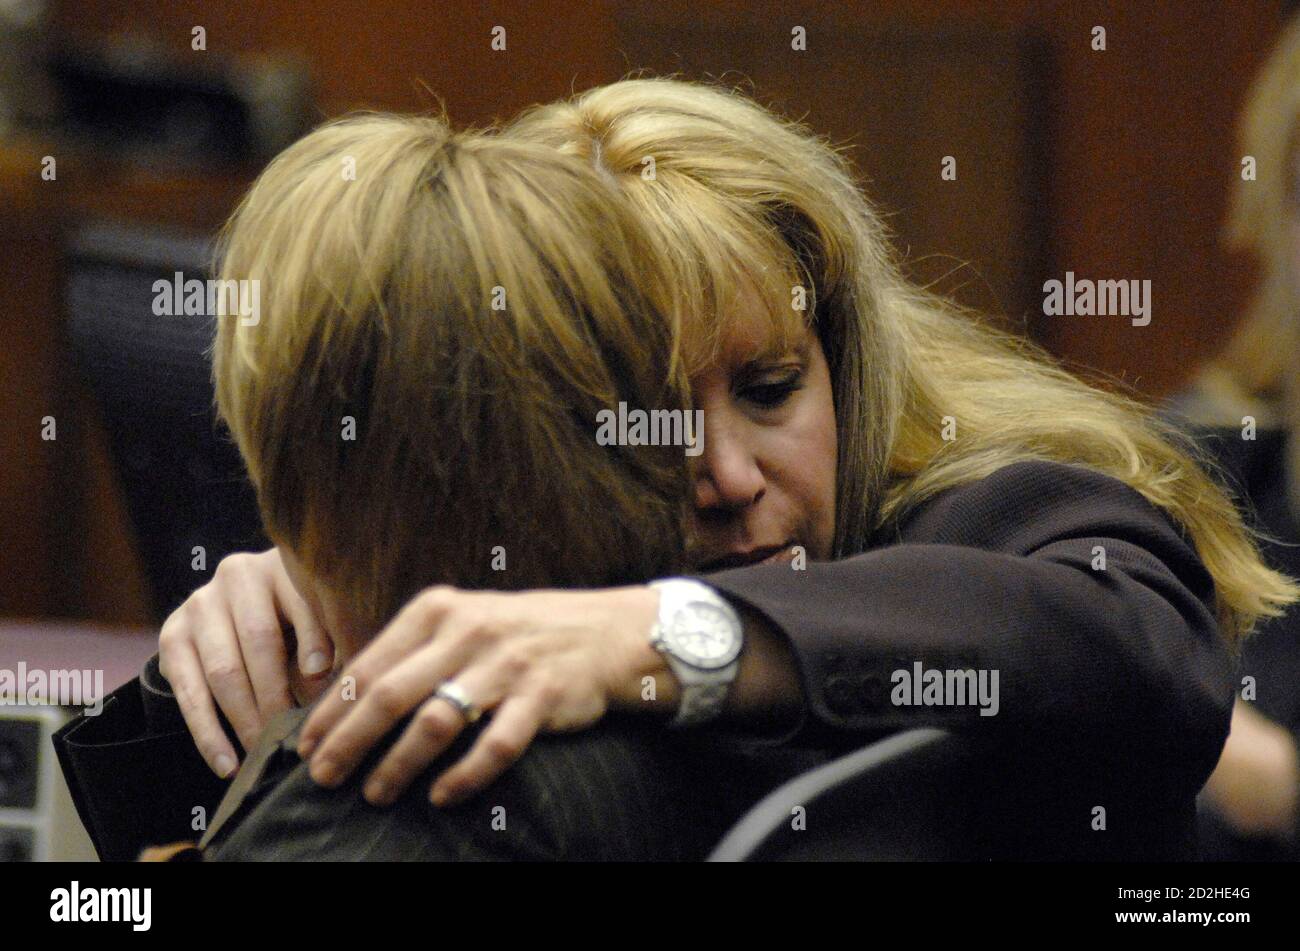 Defense attorney Linda Kenny Baden (R) whispers to music producer and defendant Phil Spector at his murder trial in Los Angeles Superior Court in Los Angeles, California May 10, 2007. Spector is accused of killing actress Lana Clarkson in his home in 2003.   REUTERS/Jamie Rector/Pool  (UNTED STATES) Stock Photo